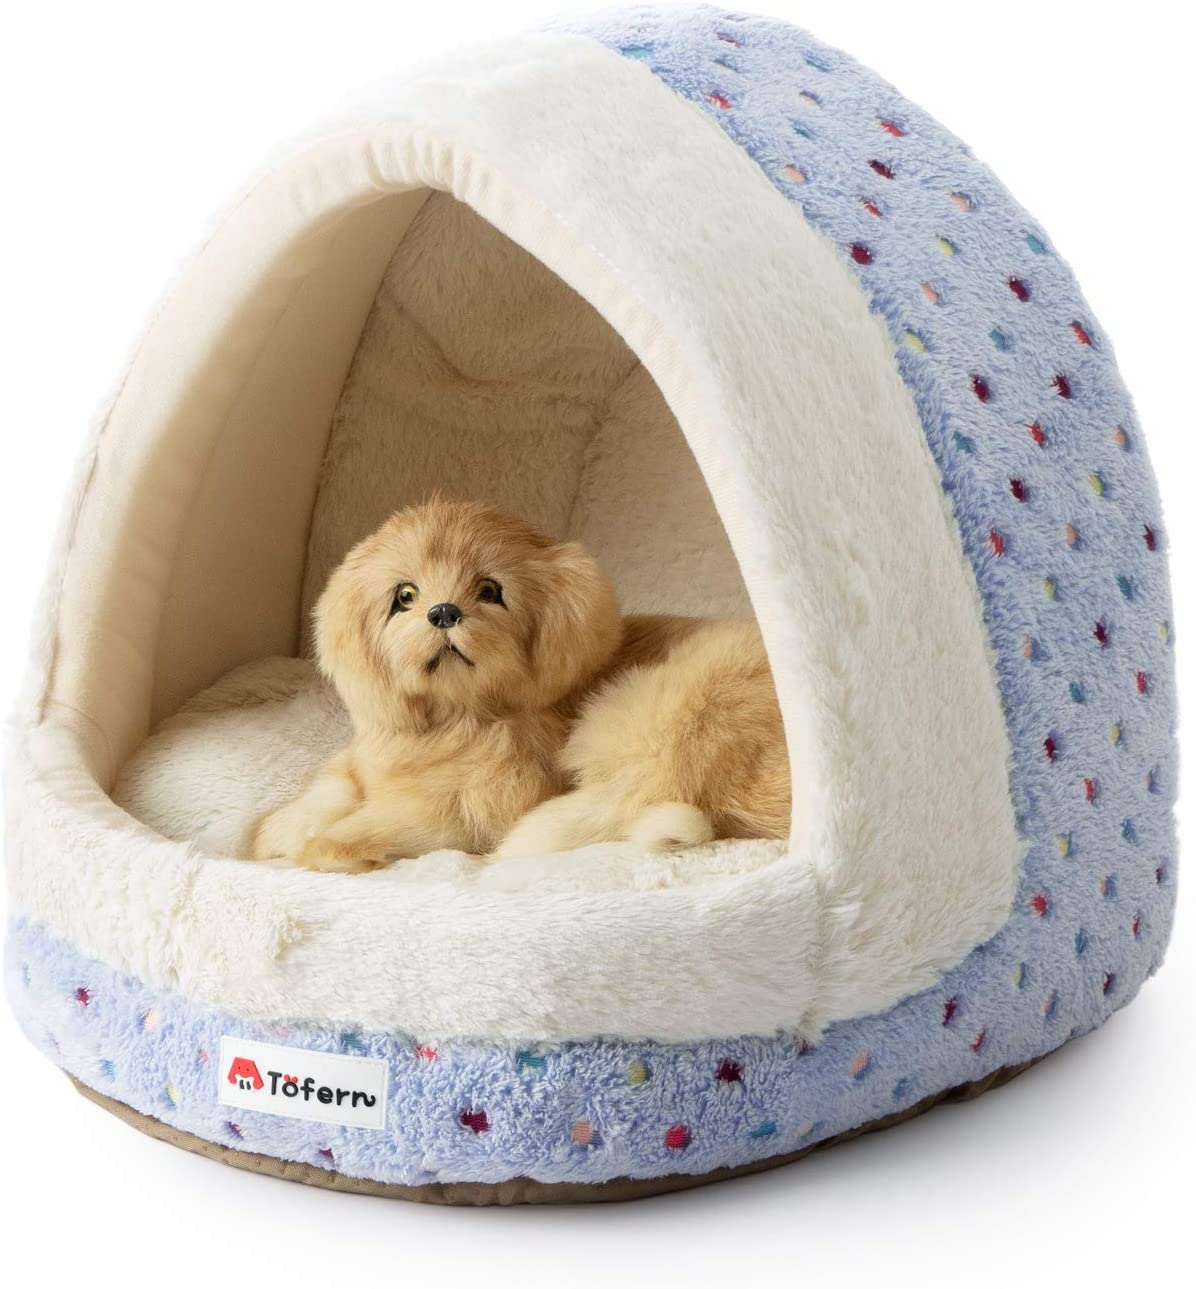 Tofern Patterned Igloo House Dog Bed